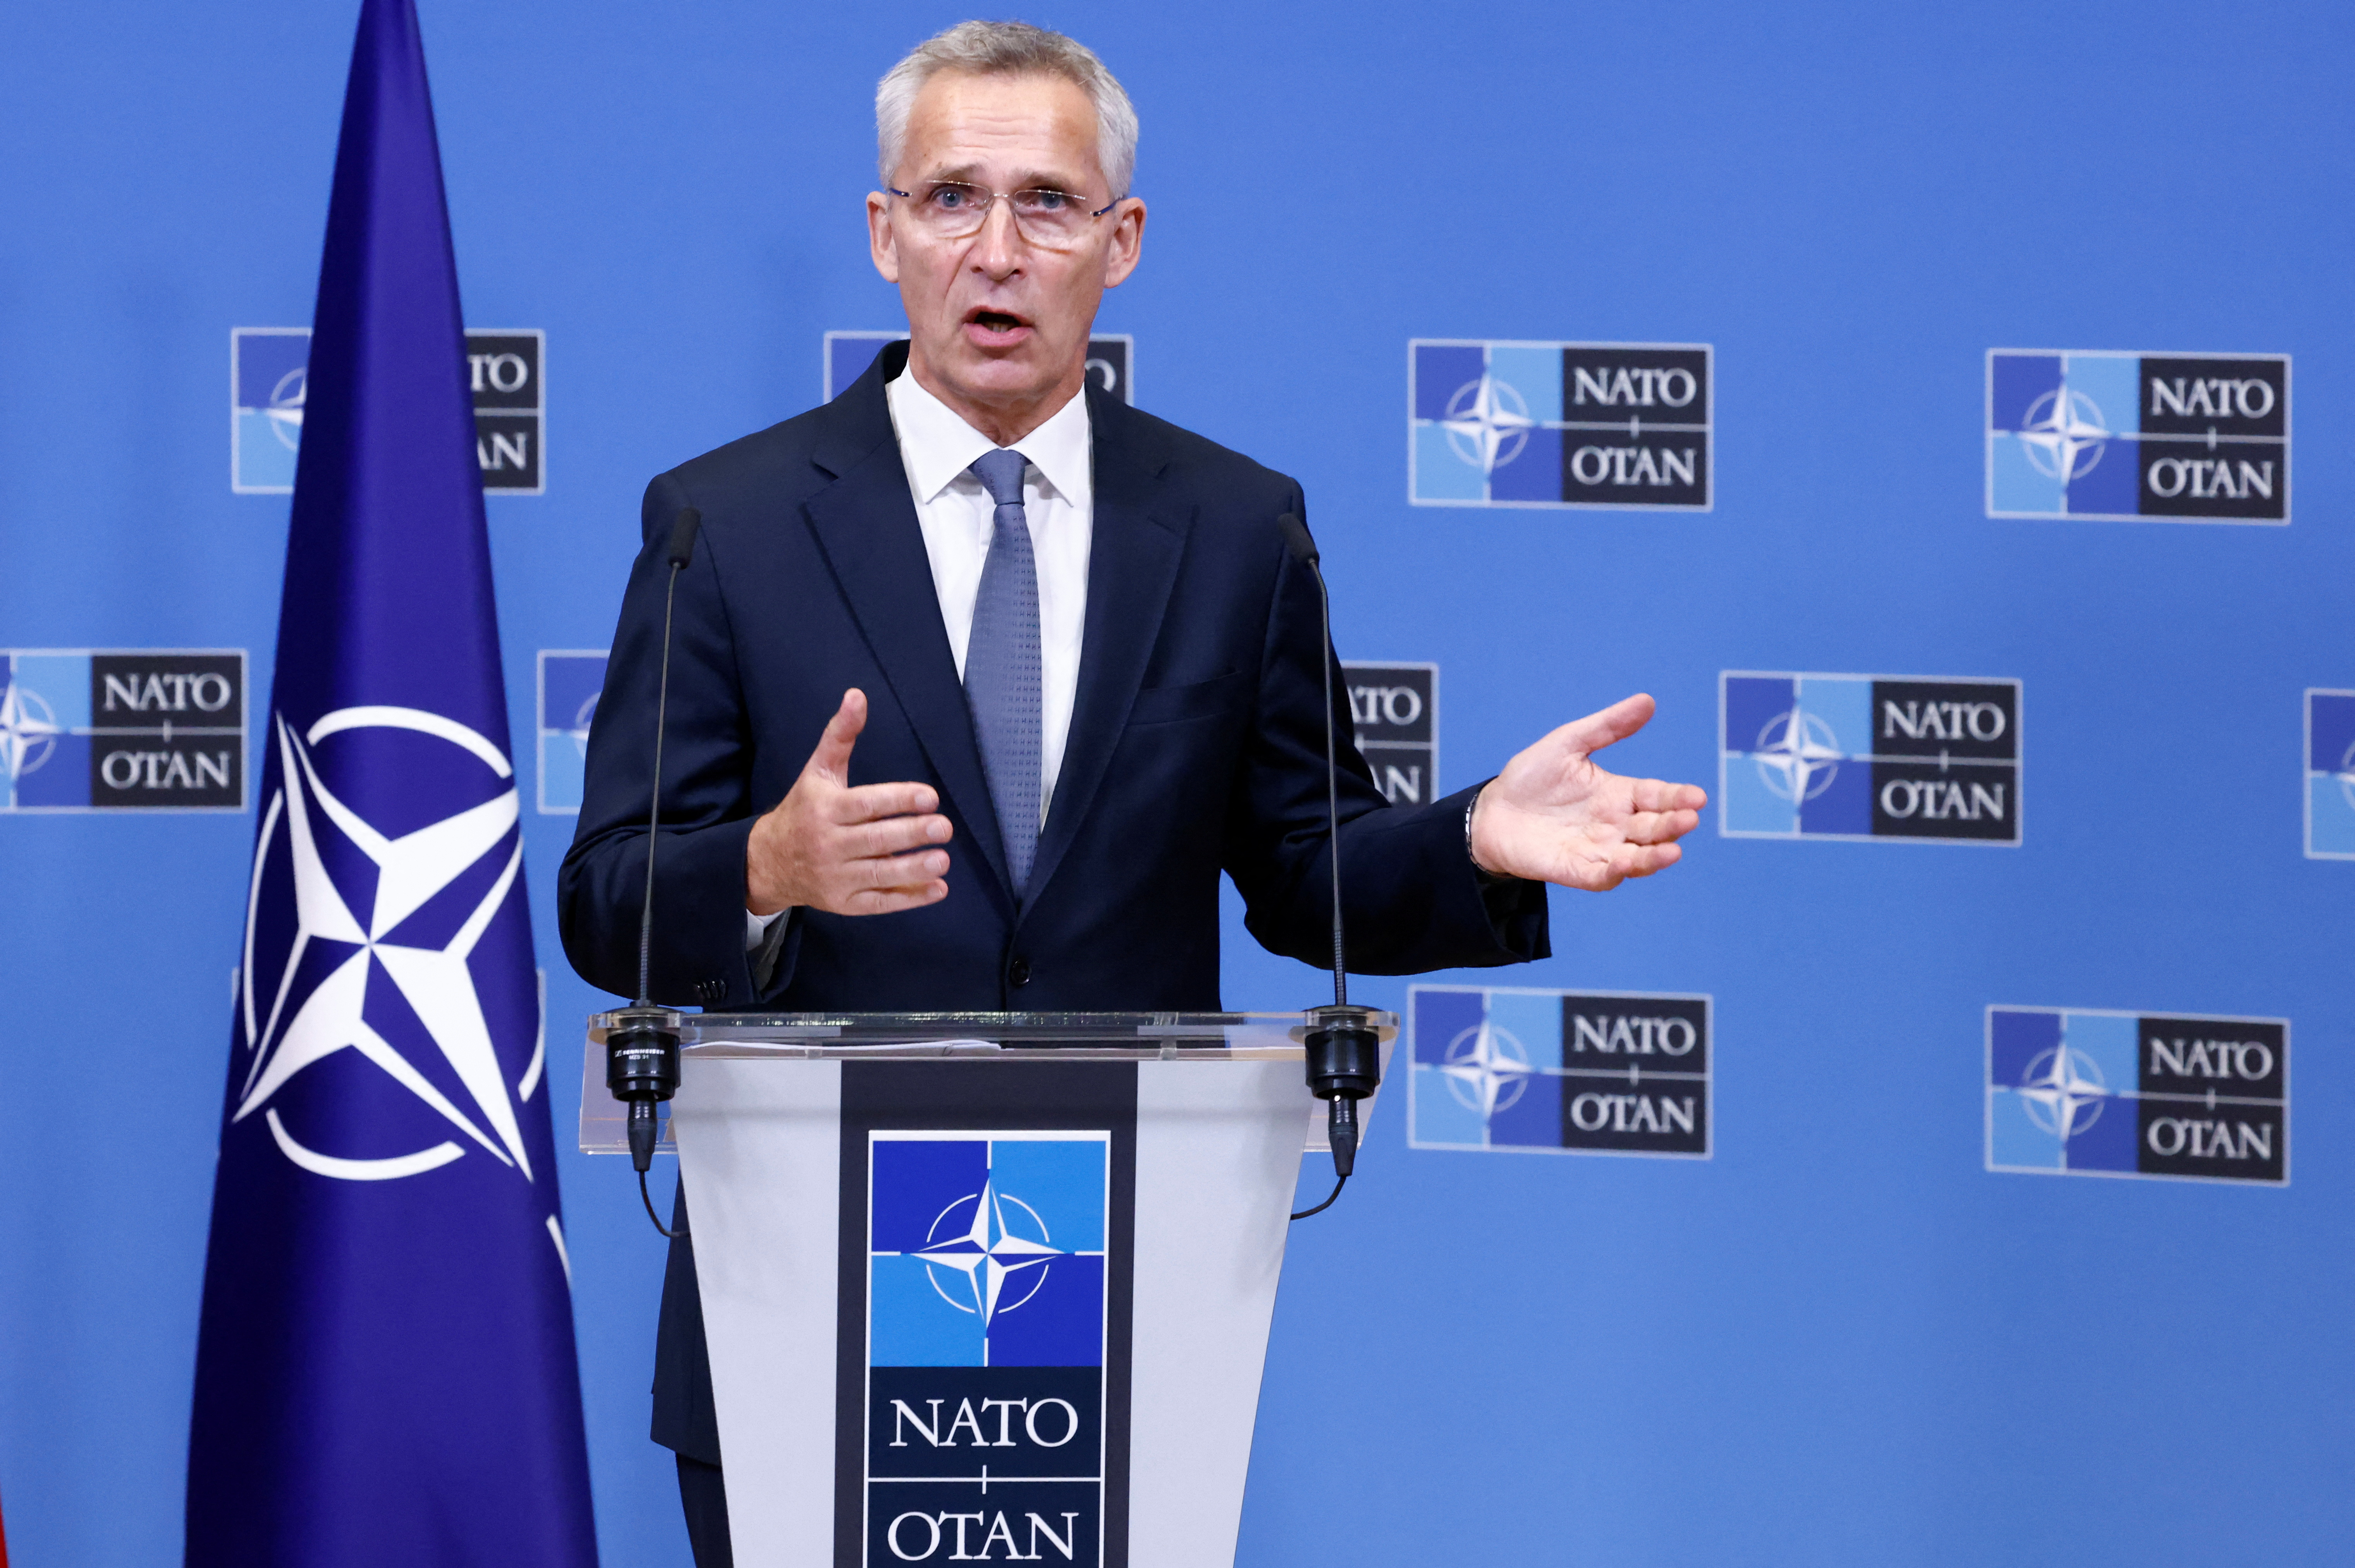 FILE PHOTO - Romanian PM Nicolae Ciuca and NATO Secretary General Jens Stoltenberg hold a joint news conference, in Brussels